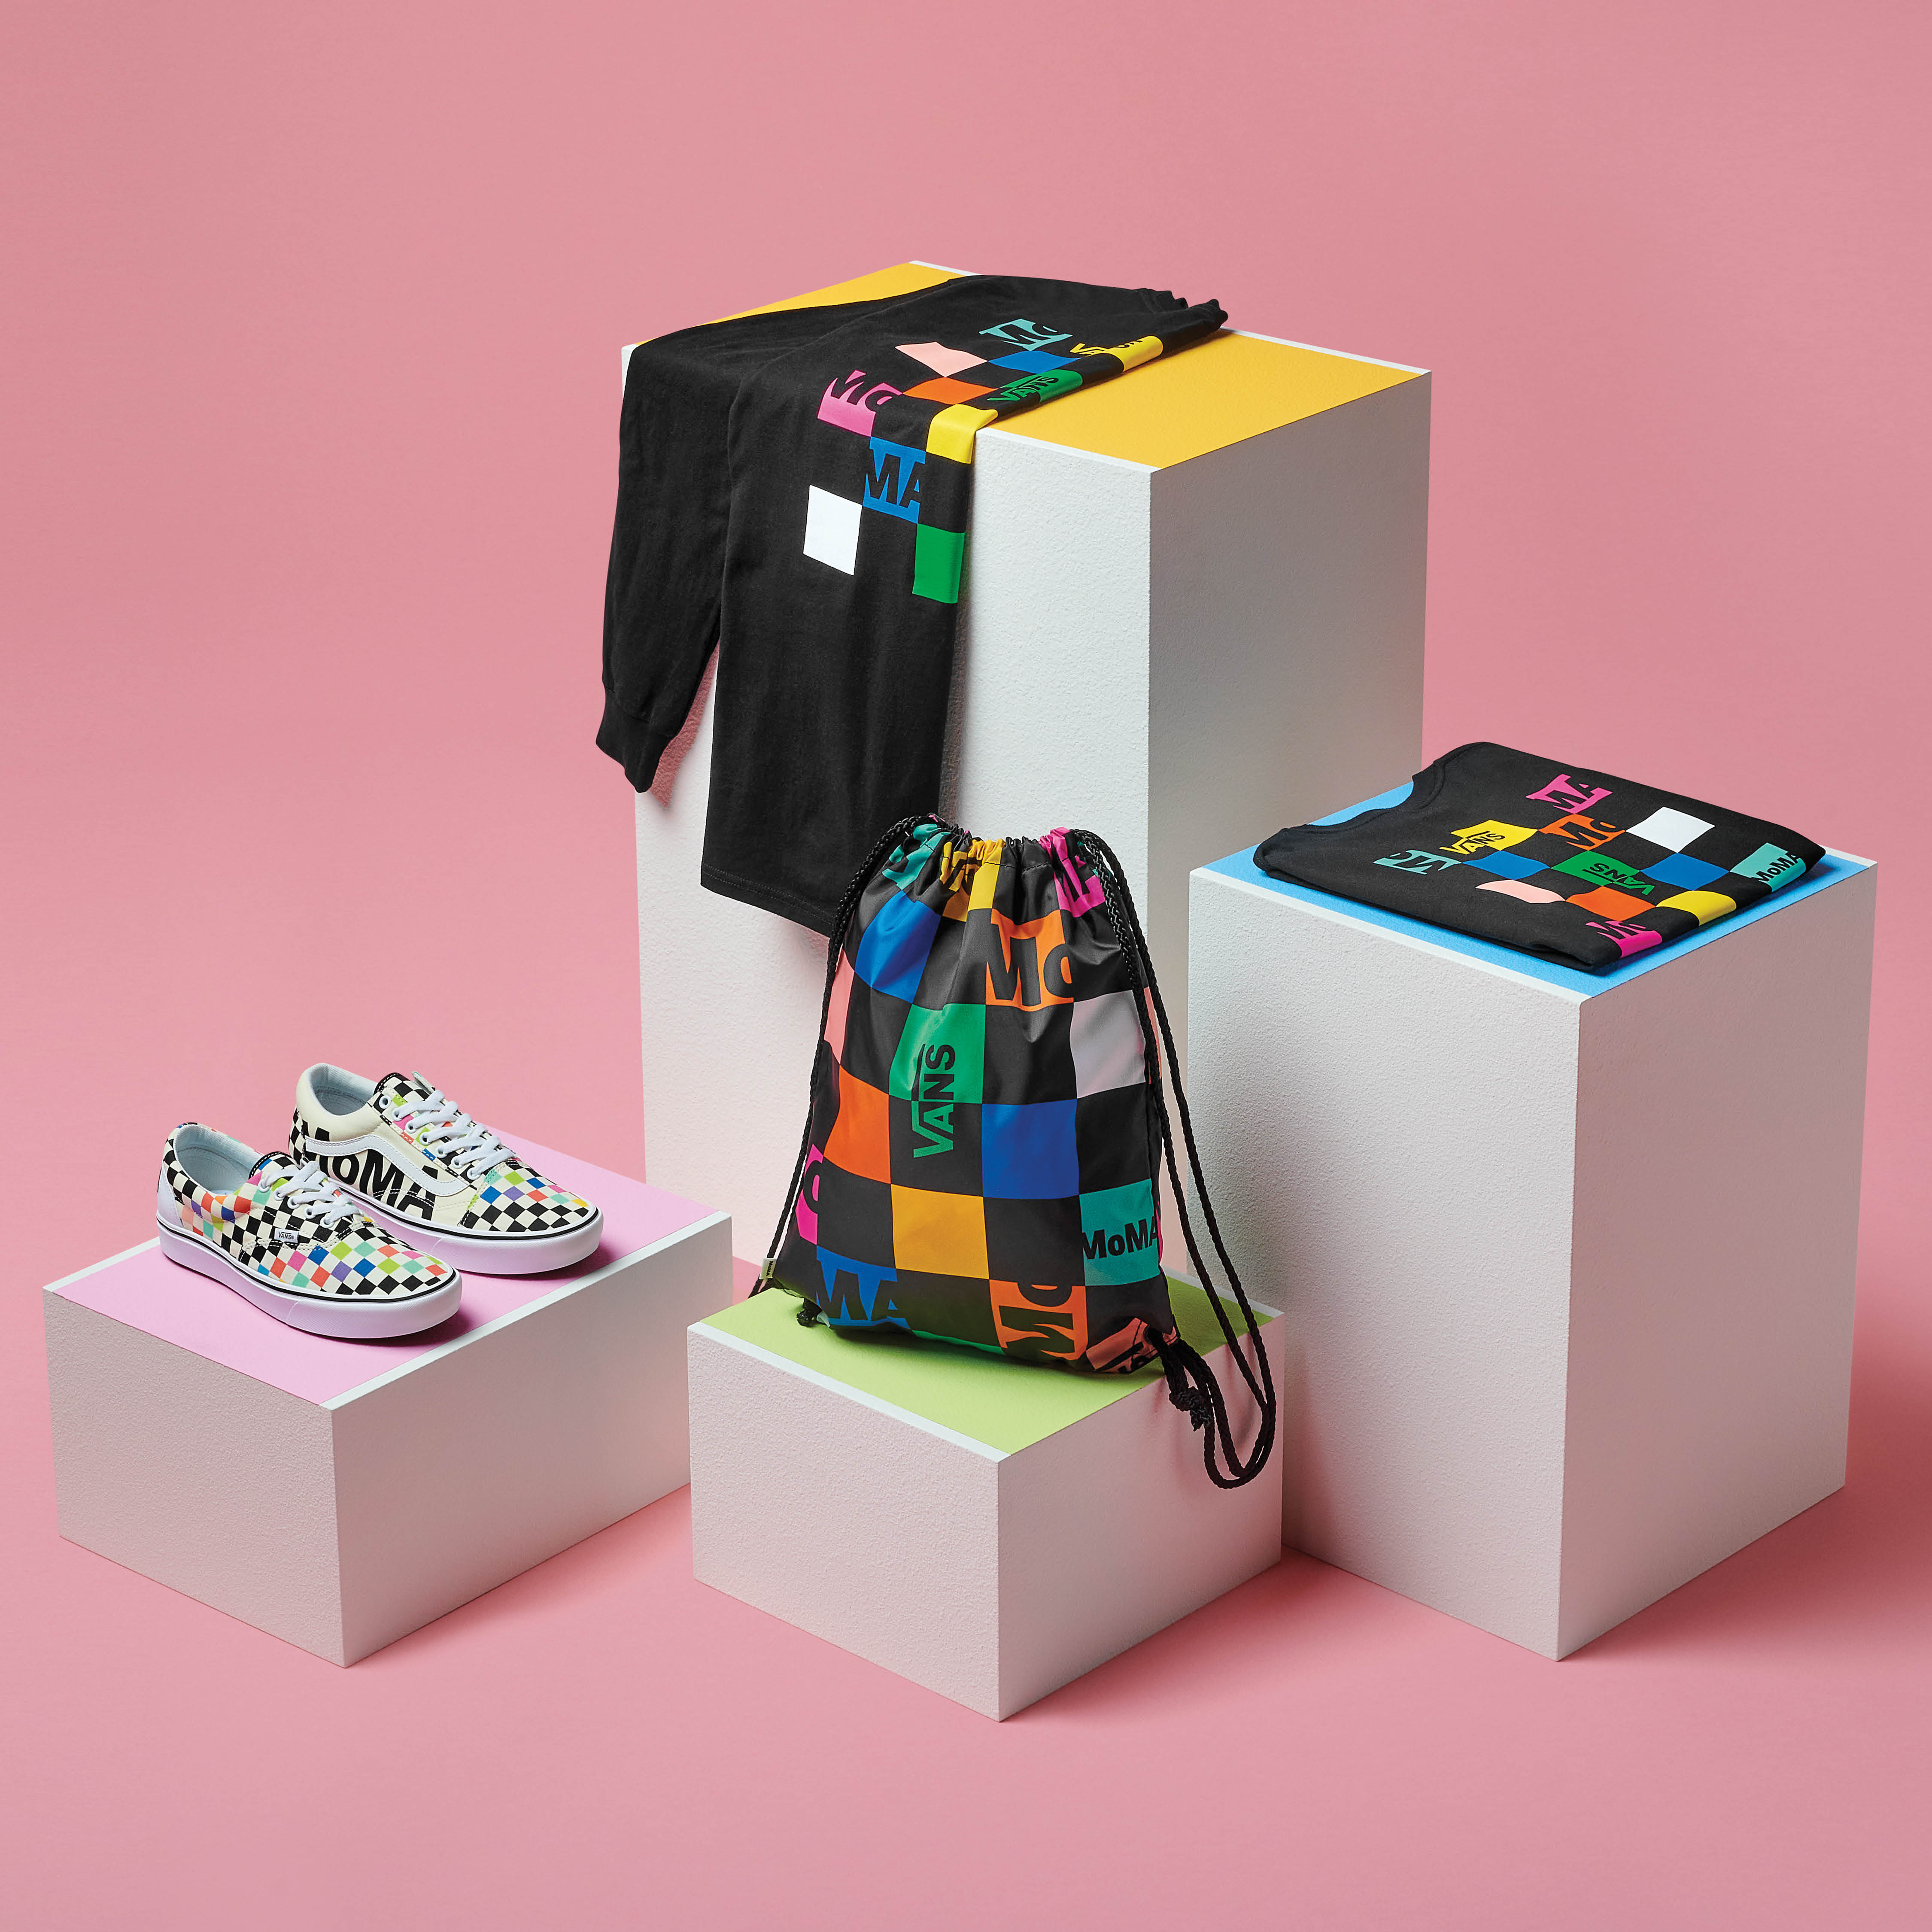 Cirkus oversøisk modnes MoMA Design Store】MOMA AND VANS COLLABORATE TO LAUNCH SPECIAL EDITION |  TOPICS | GYRE